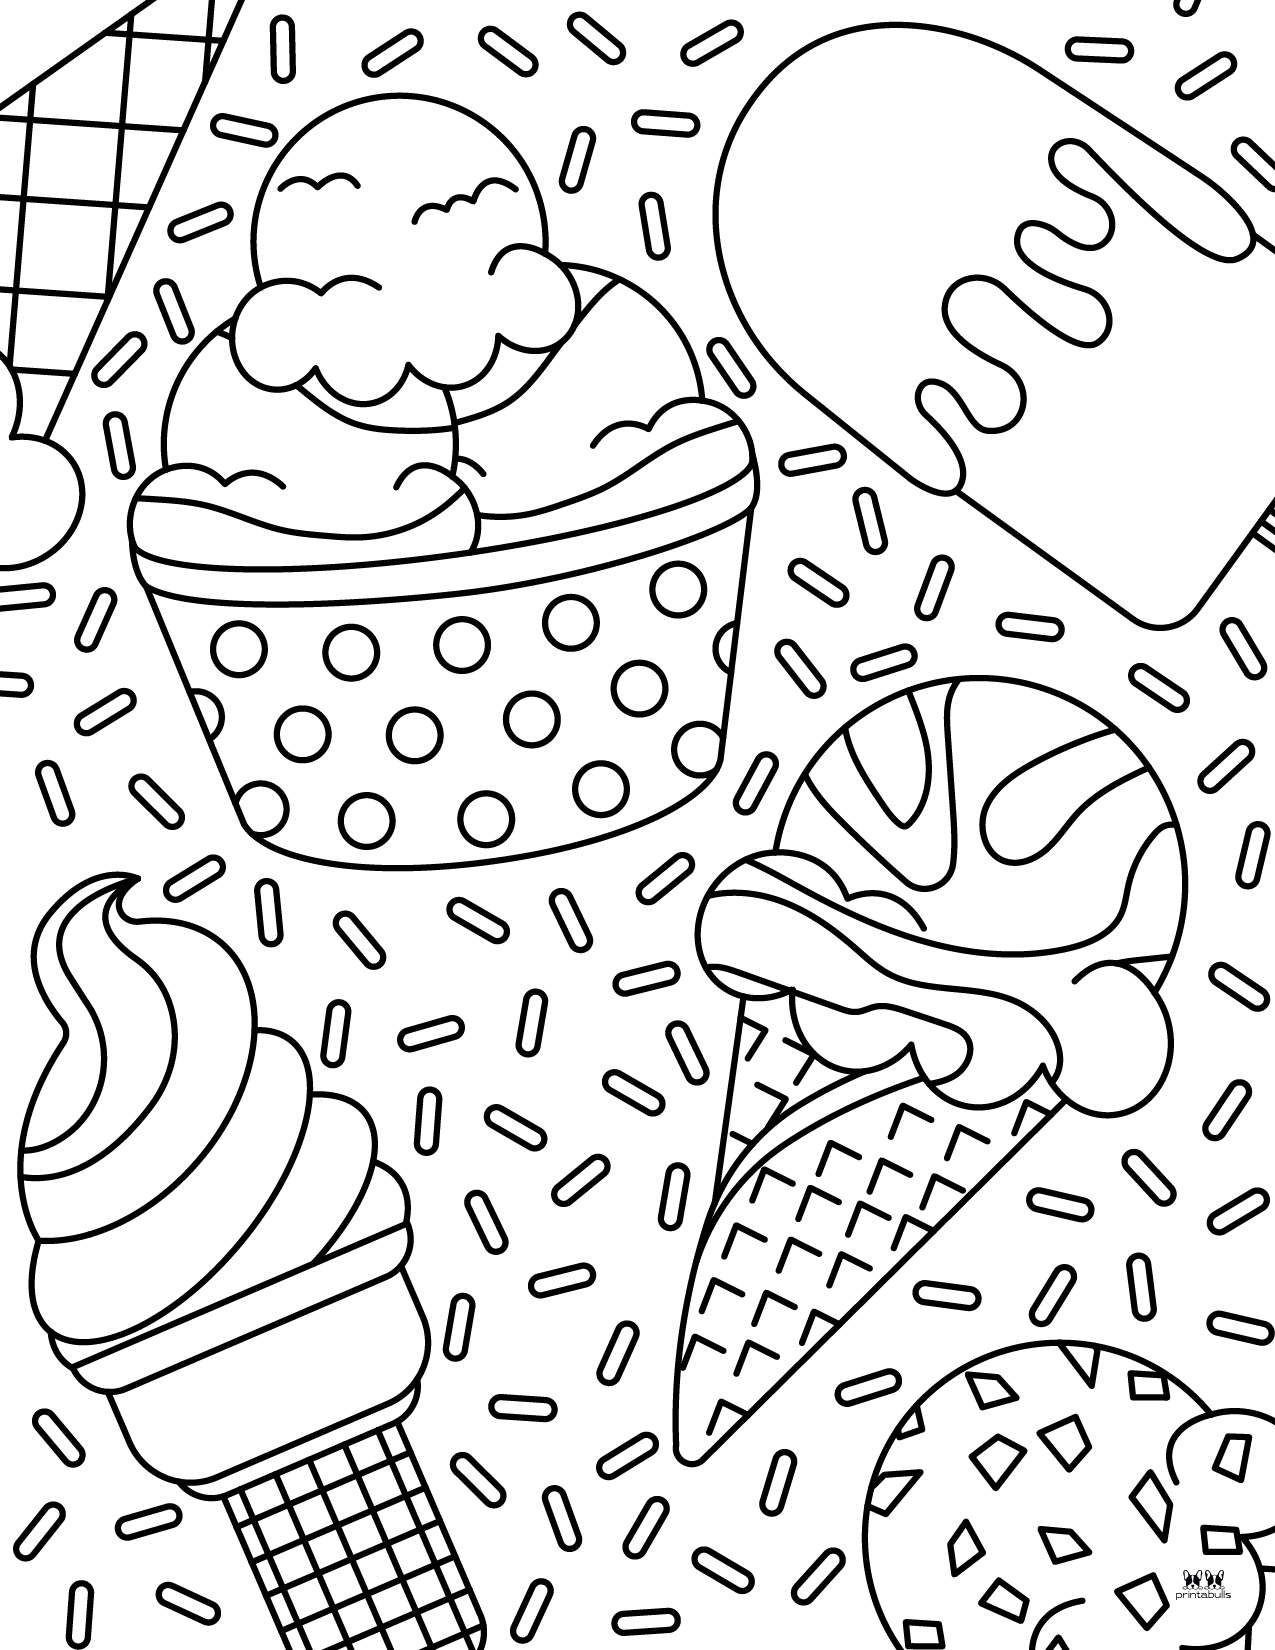 Ice Cream Coloring Pages - 26 Printable Pages | Printabulls